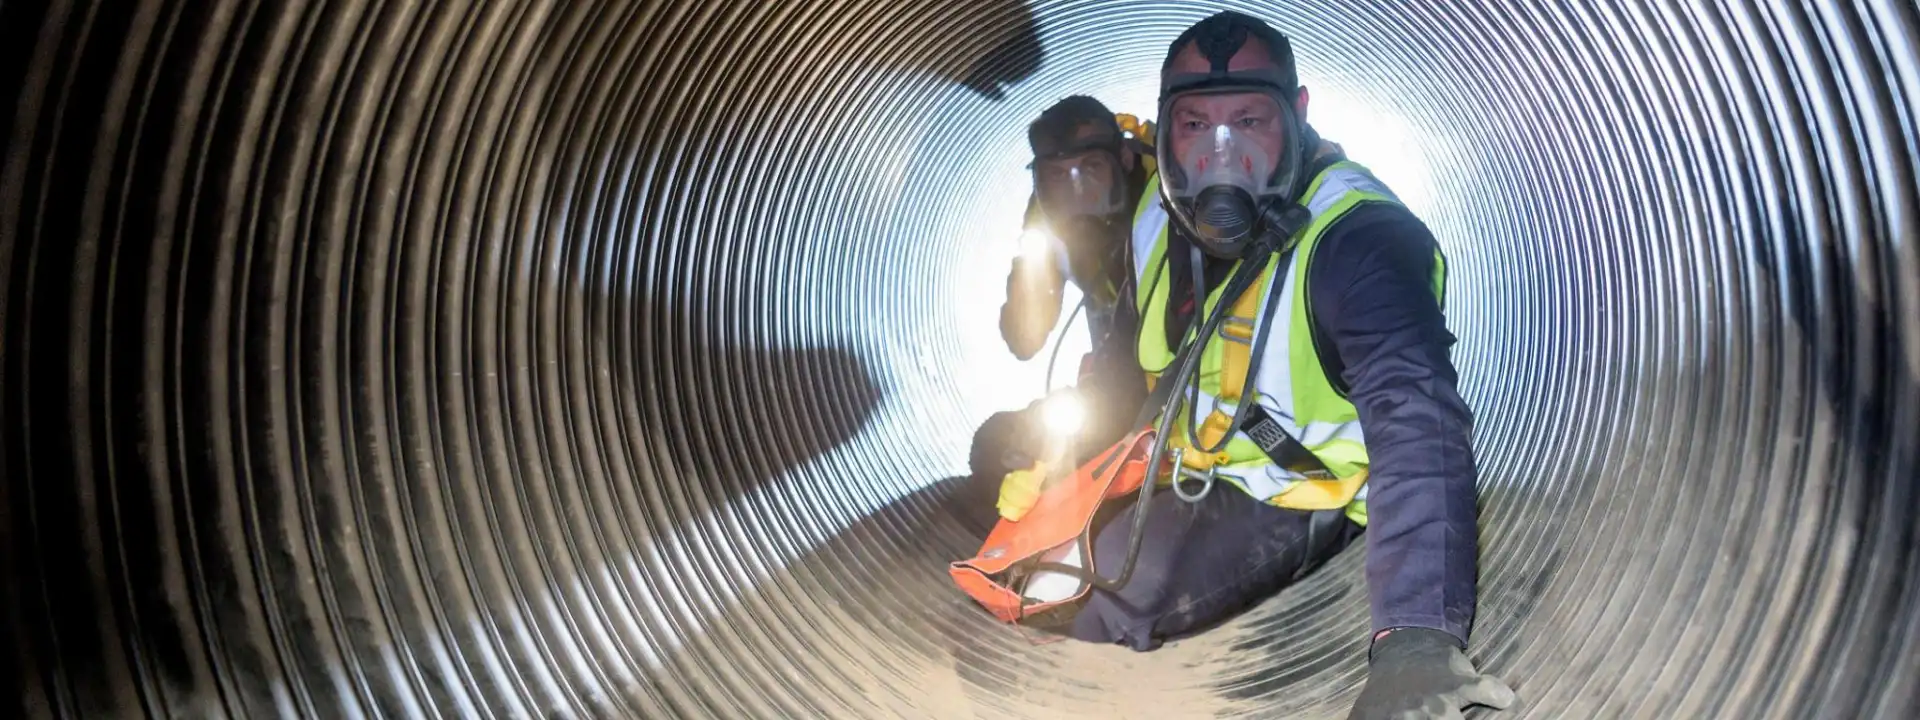 A safety worker conducting an inspection for hazards in a confined space